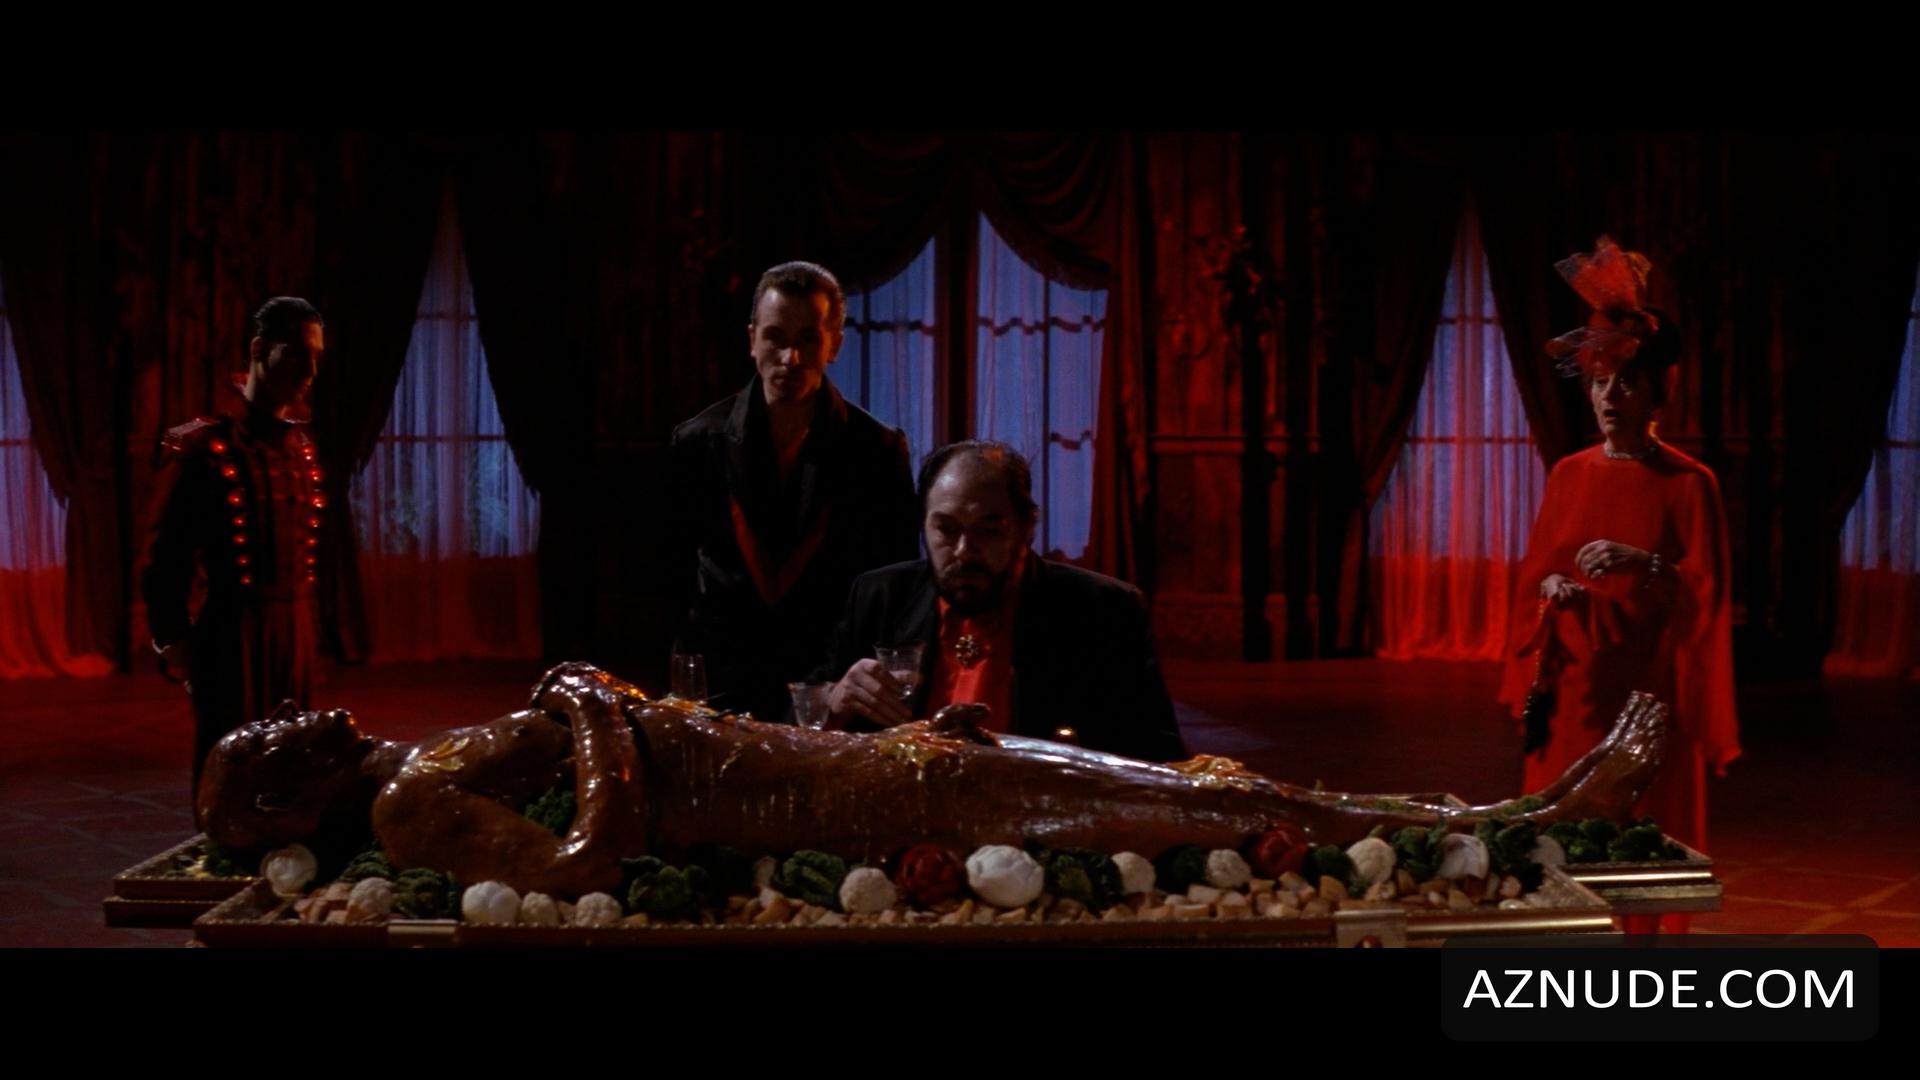 Гот ужин. The Cook, the Thief, his wife & her lover (1989) Peter Greenaway.